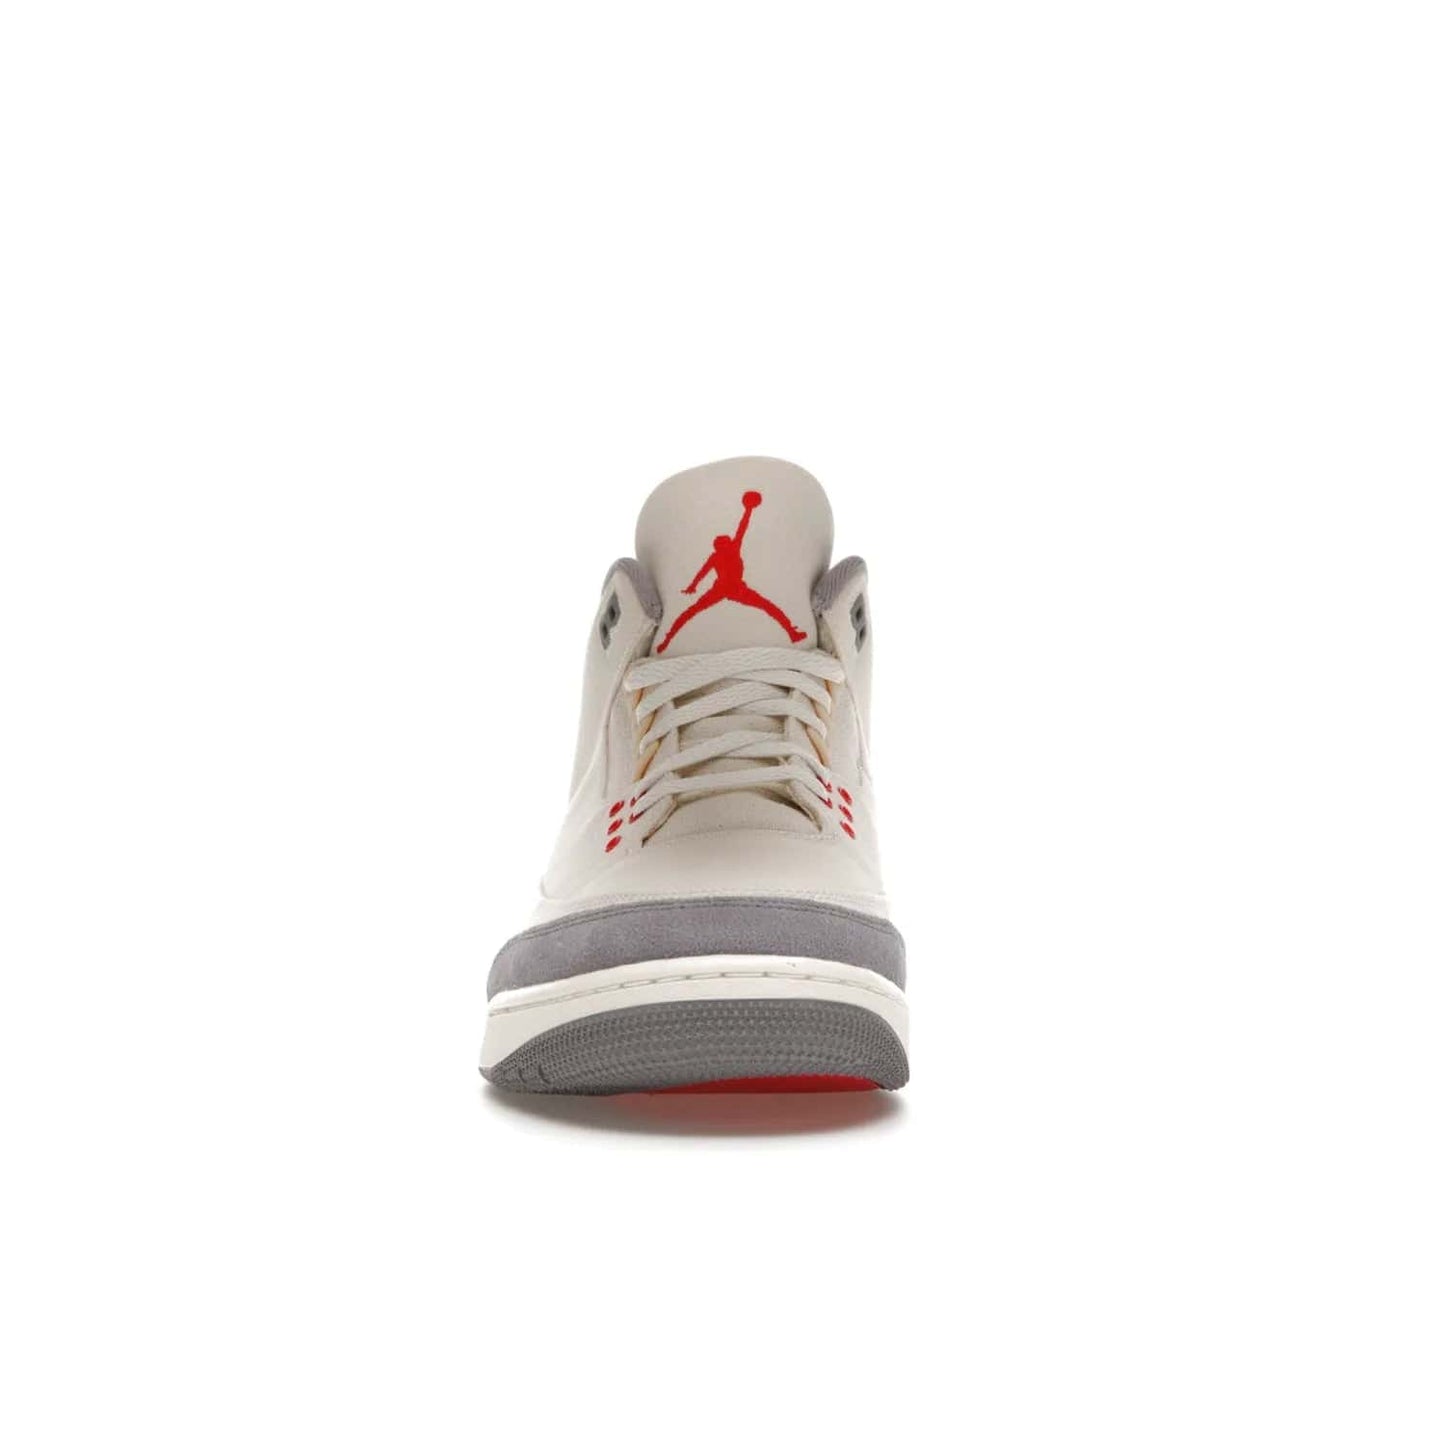 Jordan 3 Retro Muslin - Image 10 - Only at www.BallersClubKickz.com - Eye-catching Air Jordan 3 Retro Muslin in a neutral palette of grey, cream, and red. Featuring canvas upper, suede overlays and white/grey Air Max sole. Available in March 2022.